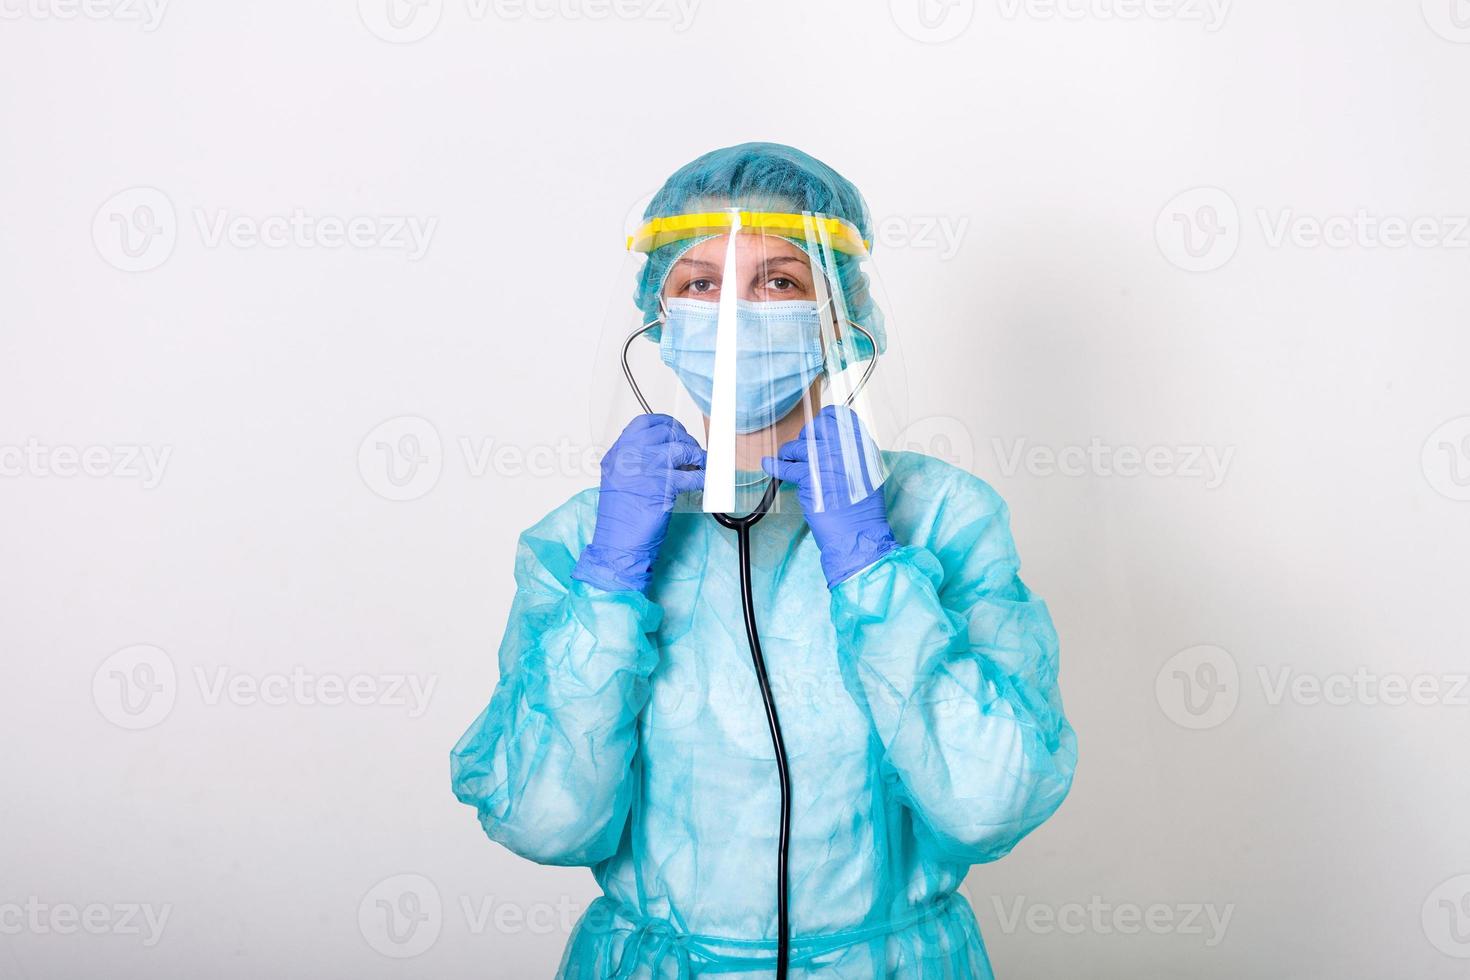 Doctor, nurse show how to wearing protection Suit for Fighting Covid-19 Corona virus with white background isolated. medical worker in full protective gear with face shield putting on her stethoscope photo